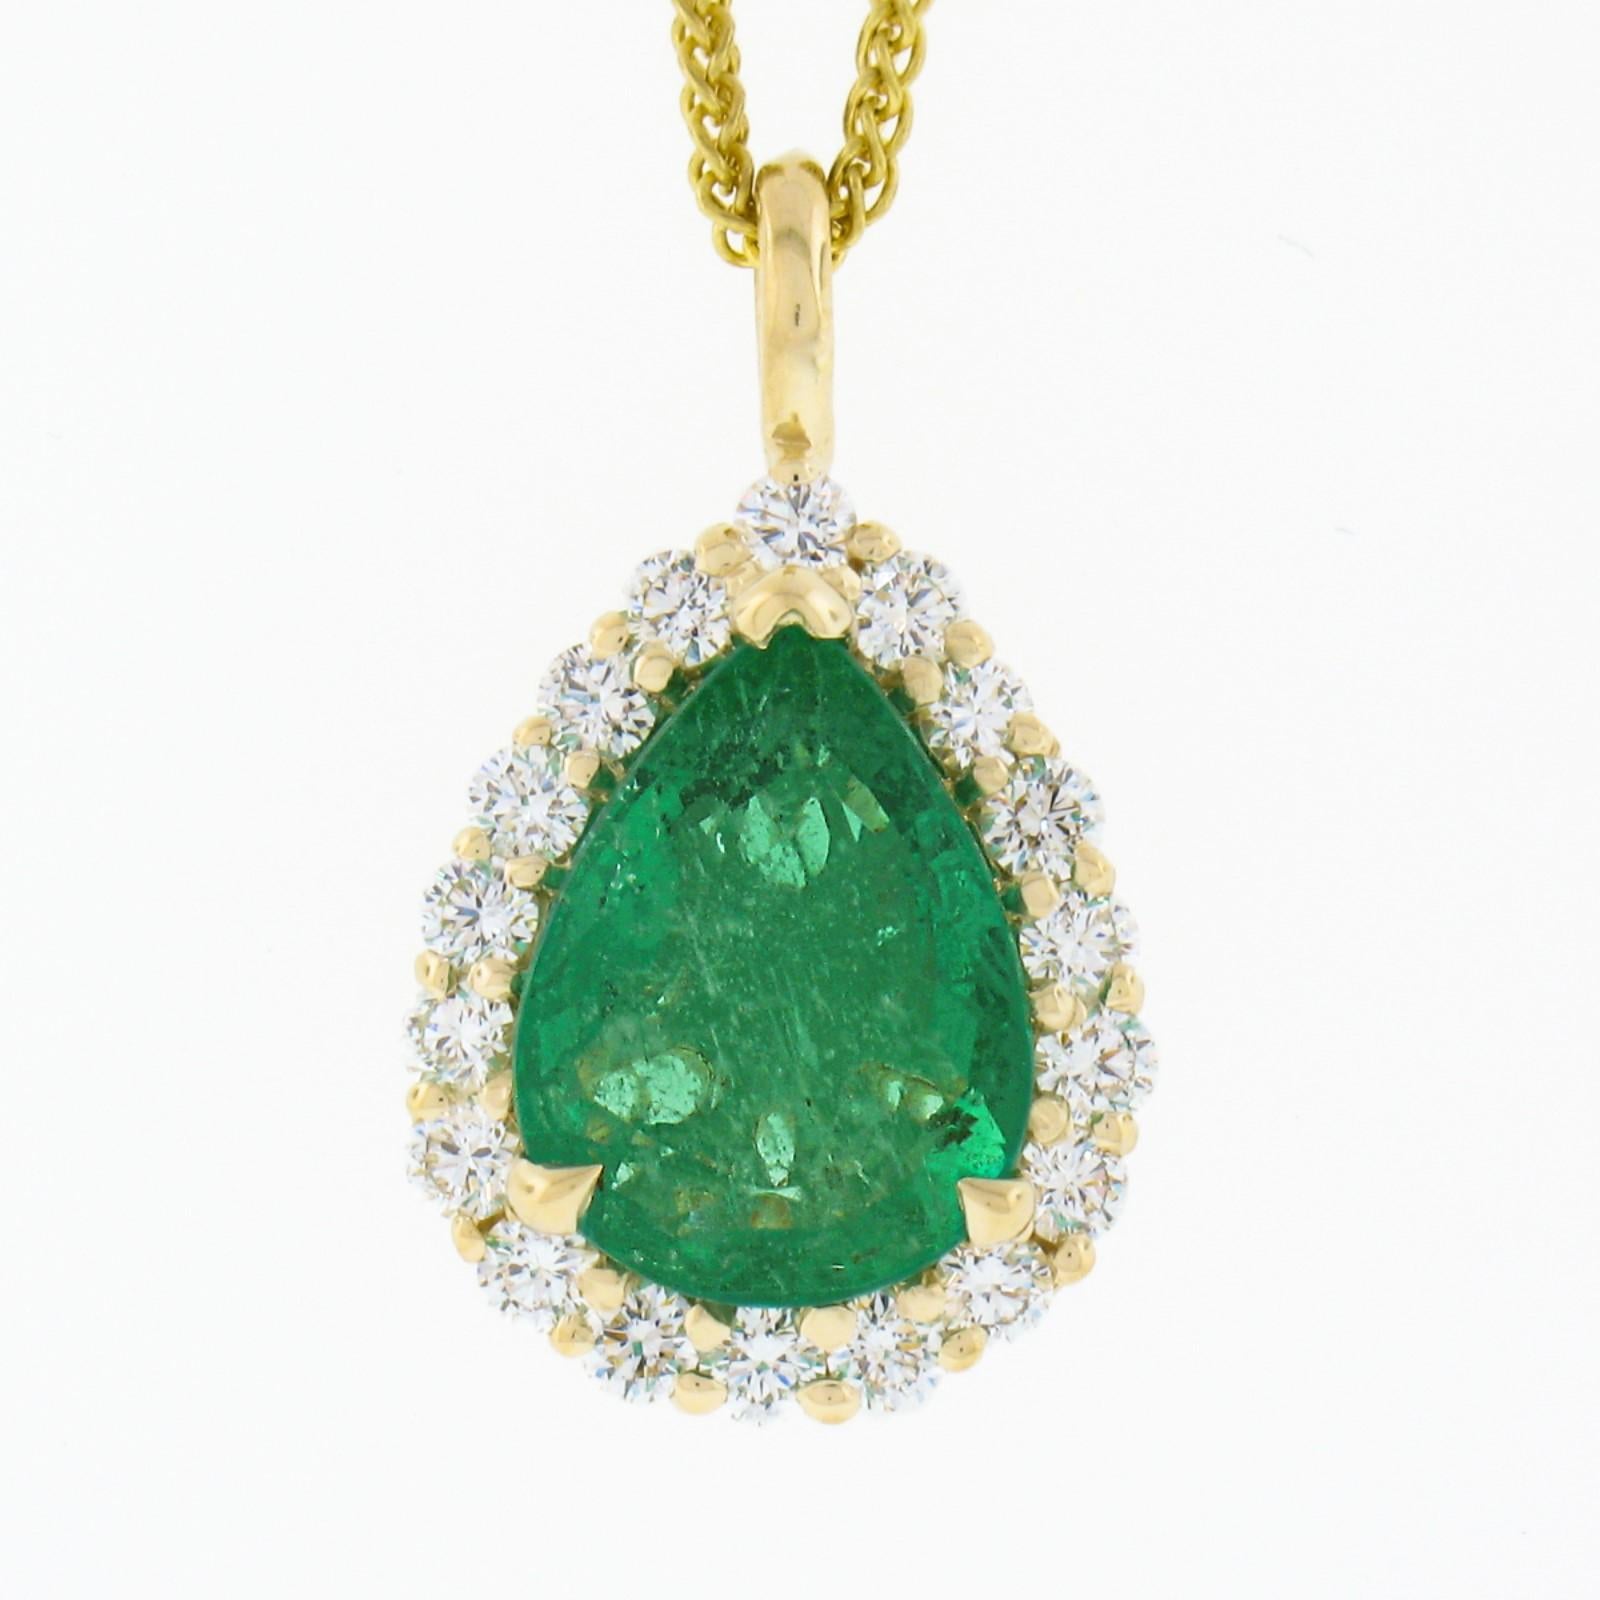 Here we have a gorgeous, custom made, emerald and diamond teardrop pendant necklace that is newly crafted in solid 14k yellow gold. The very fine quality emerald solitaire is SSEF certified with a pear brilliant cut, displaying the most attractive